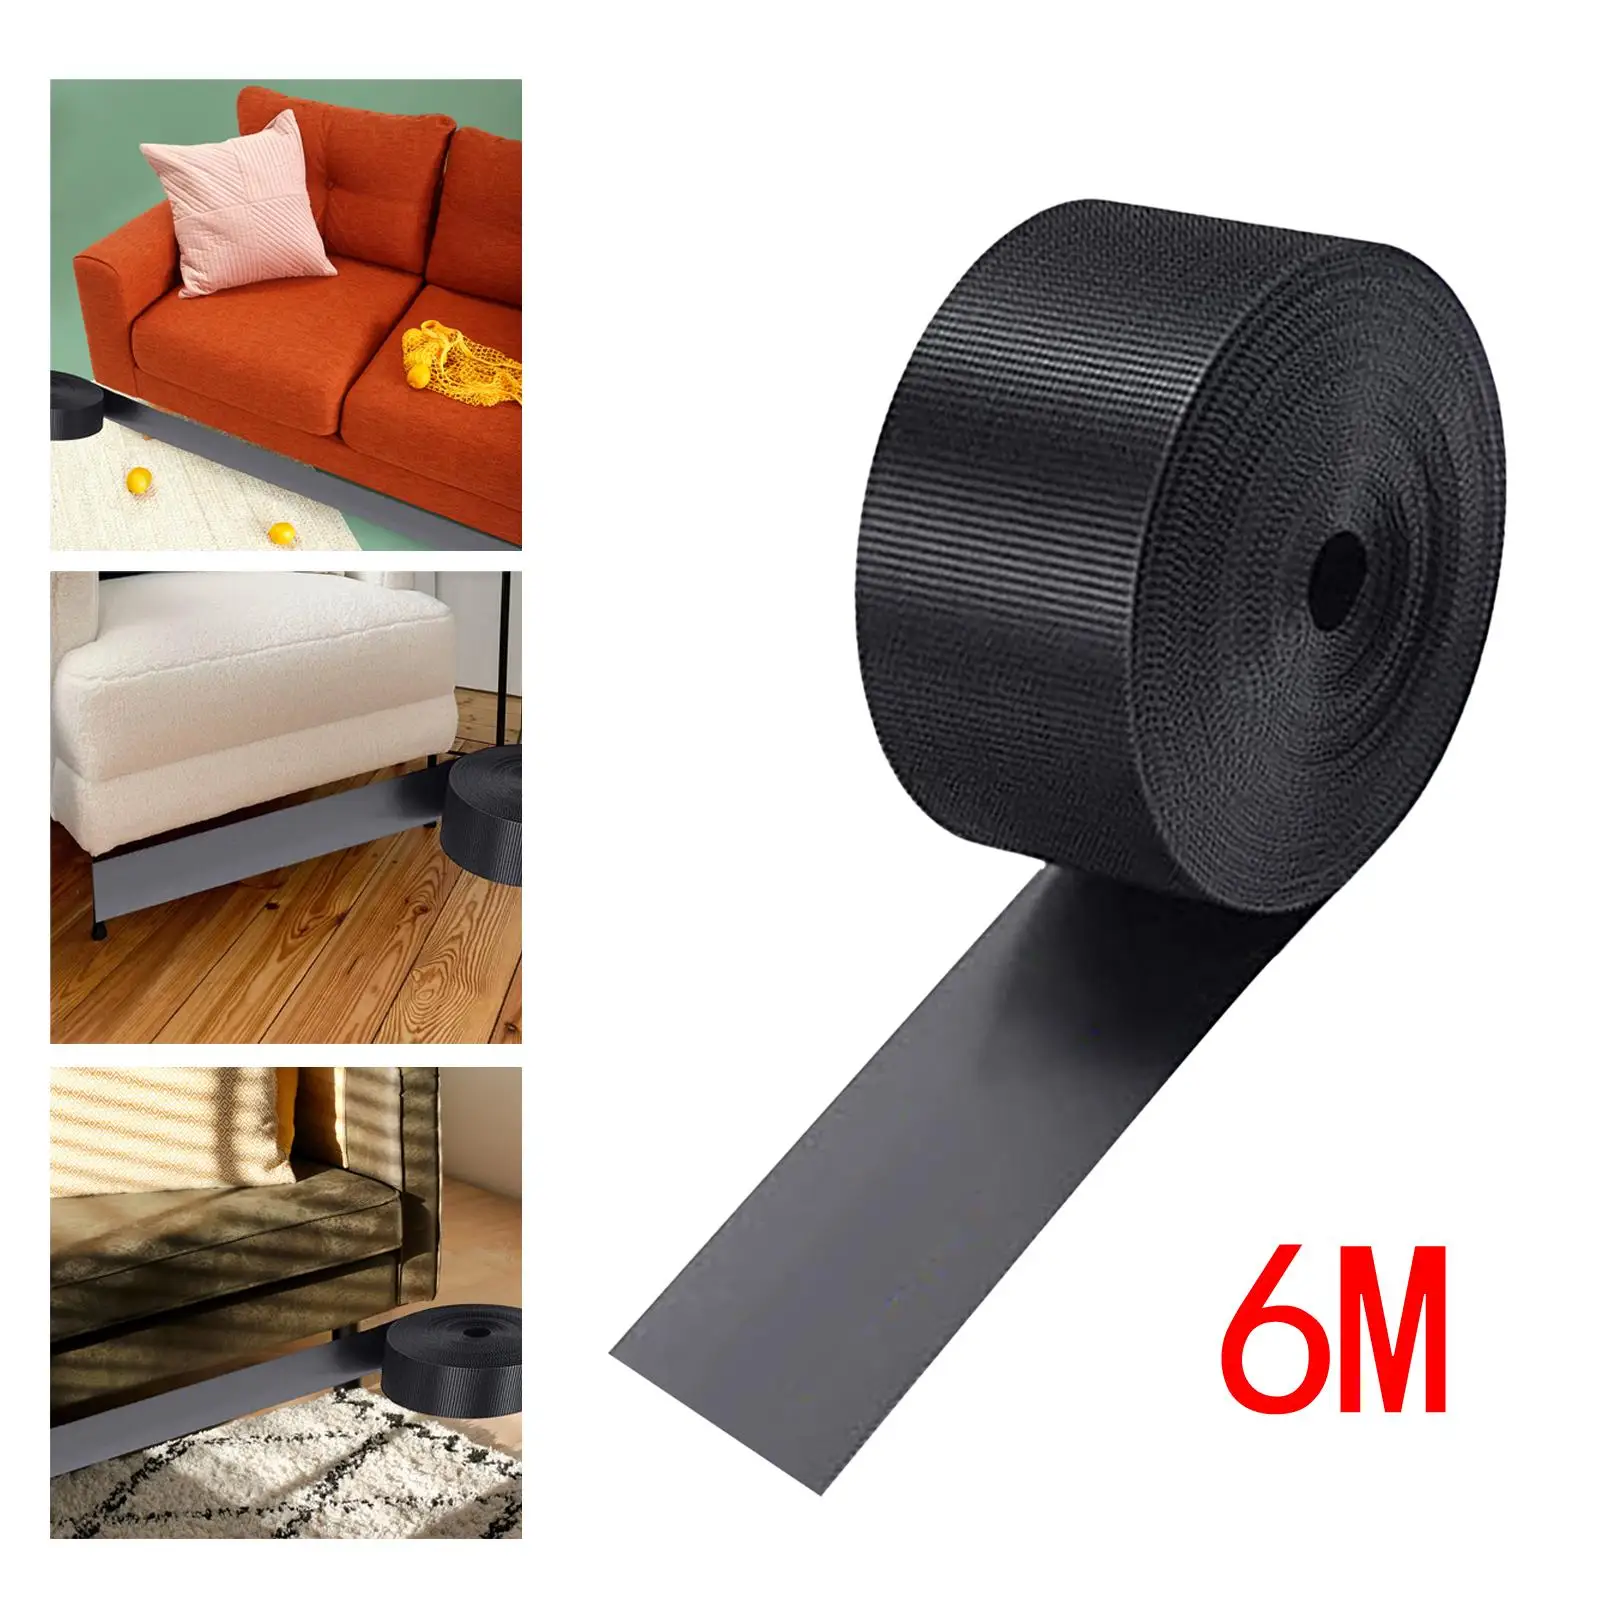 2Pcs Sofa Toy Bumper with Mounting Strap Sectional Connector Bumper Guard Under Sofa Barrier for Home Furniture Sofa Bed Couch